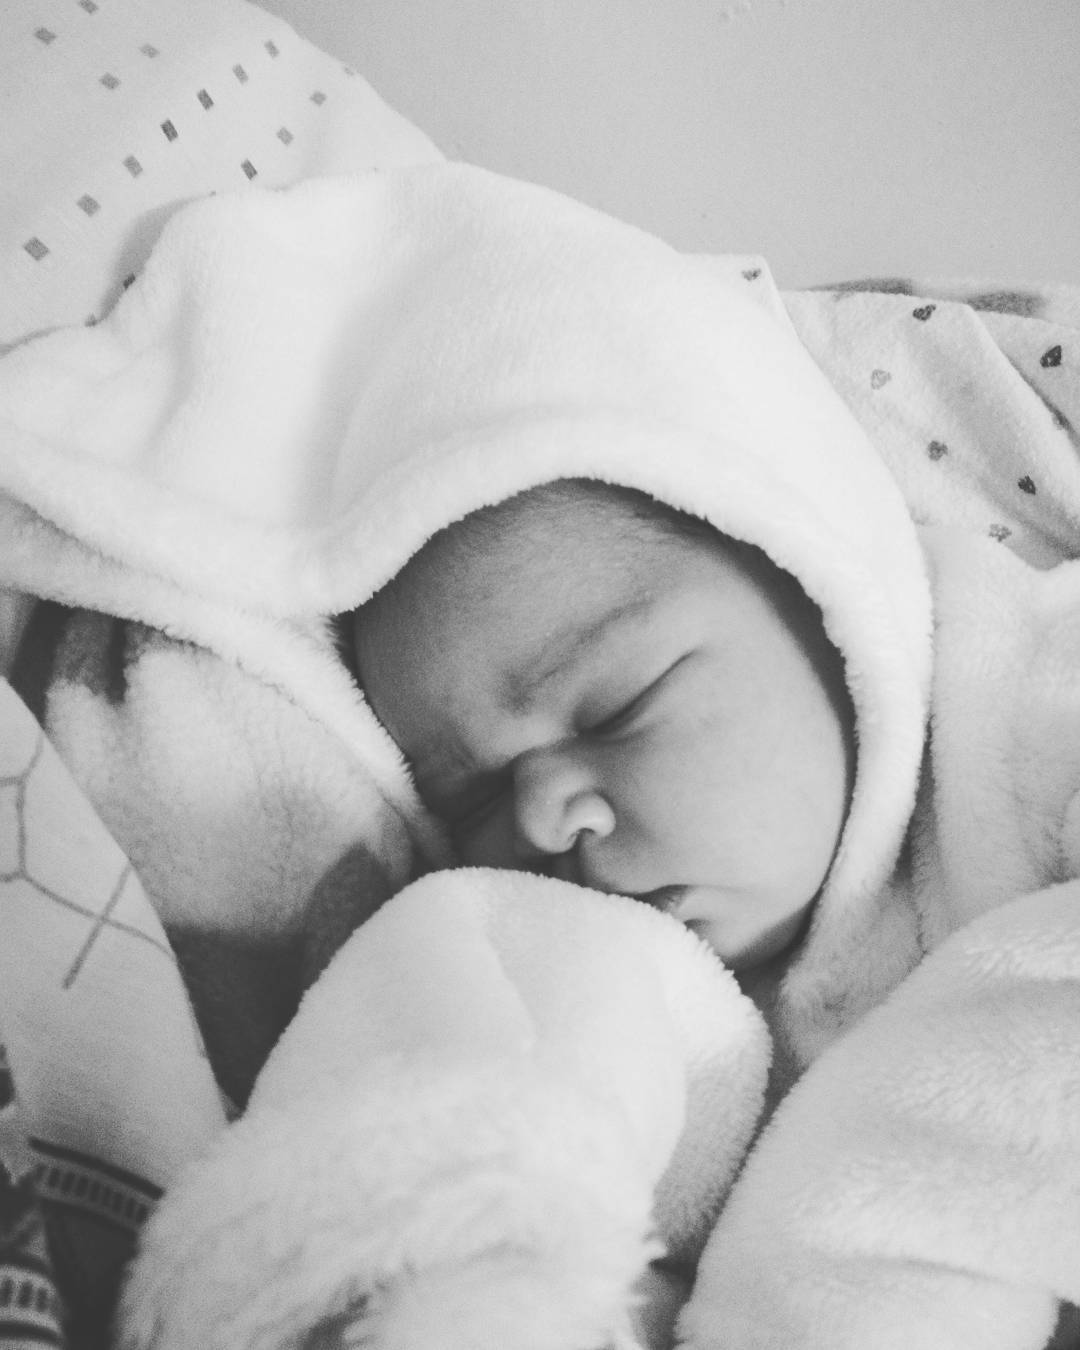 Madtraxx and his wife welcome healthy baby girl